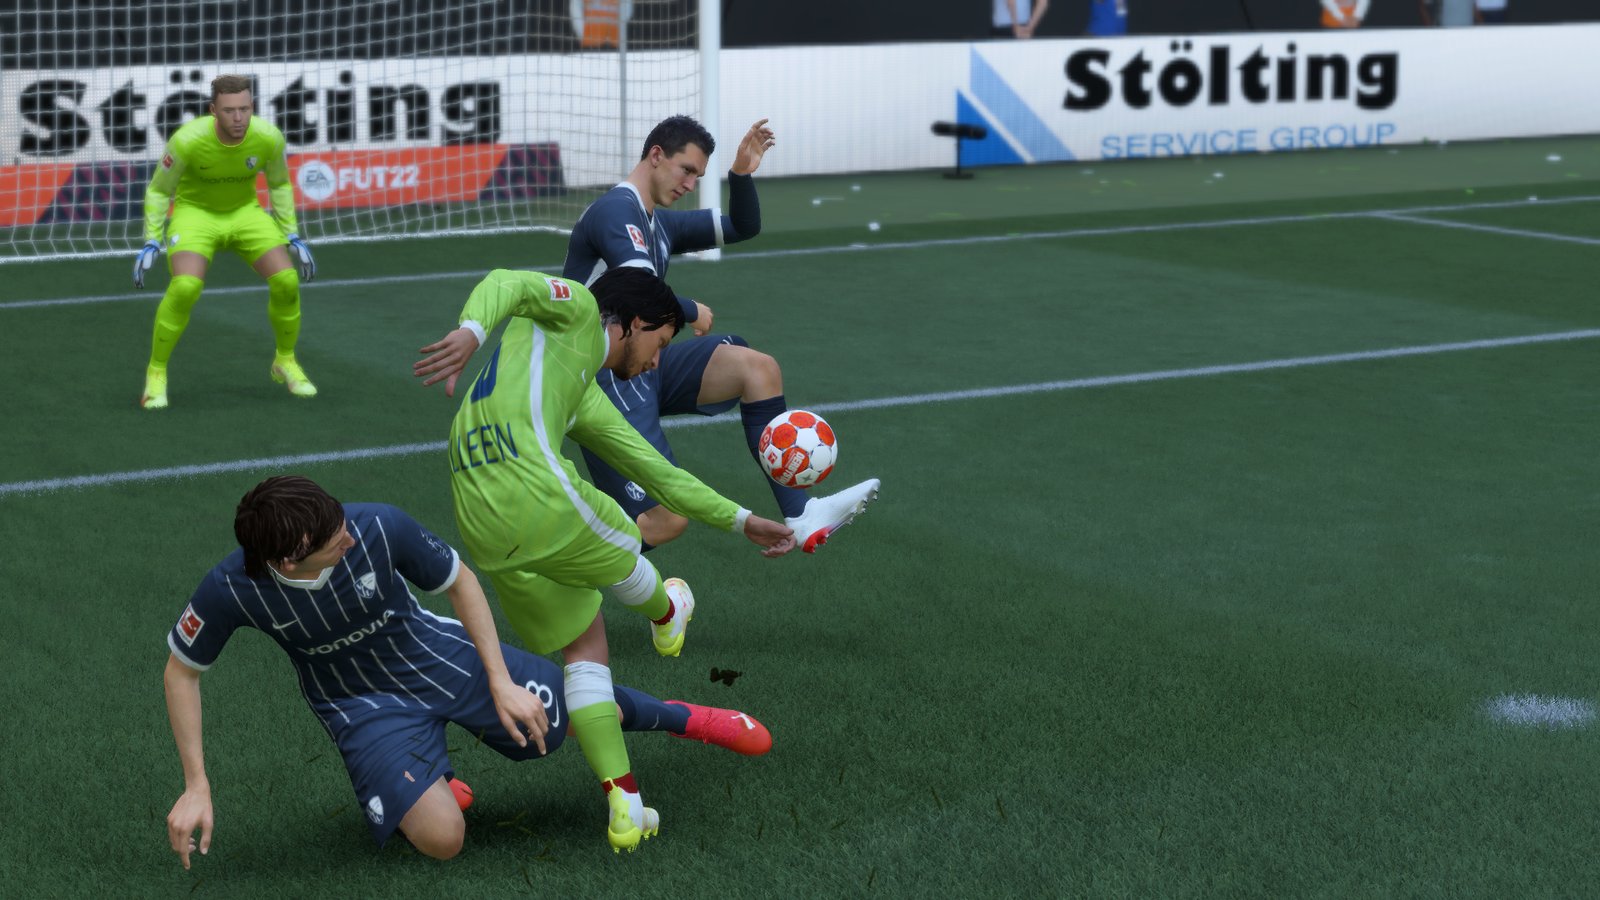 A player shoots at goal in FIFA 22.